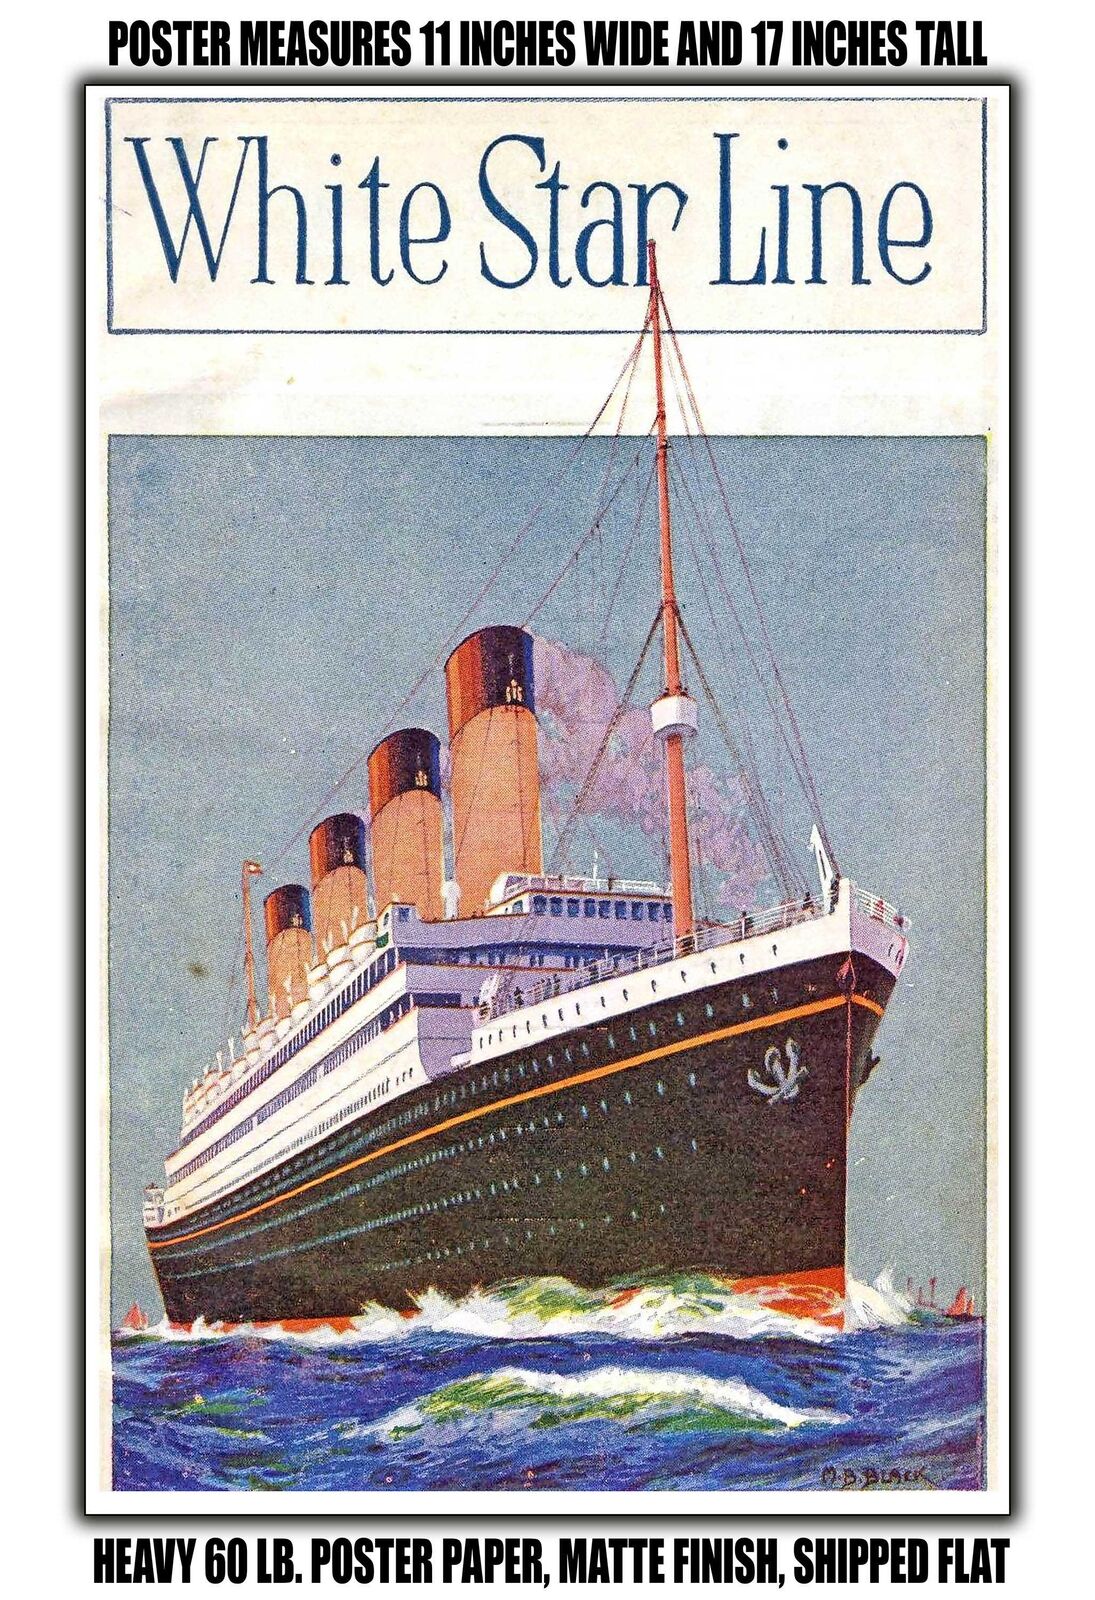 11x17 POSTER - 1926 White Star Line RMS Olympic